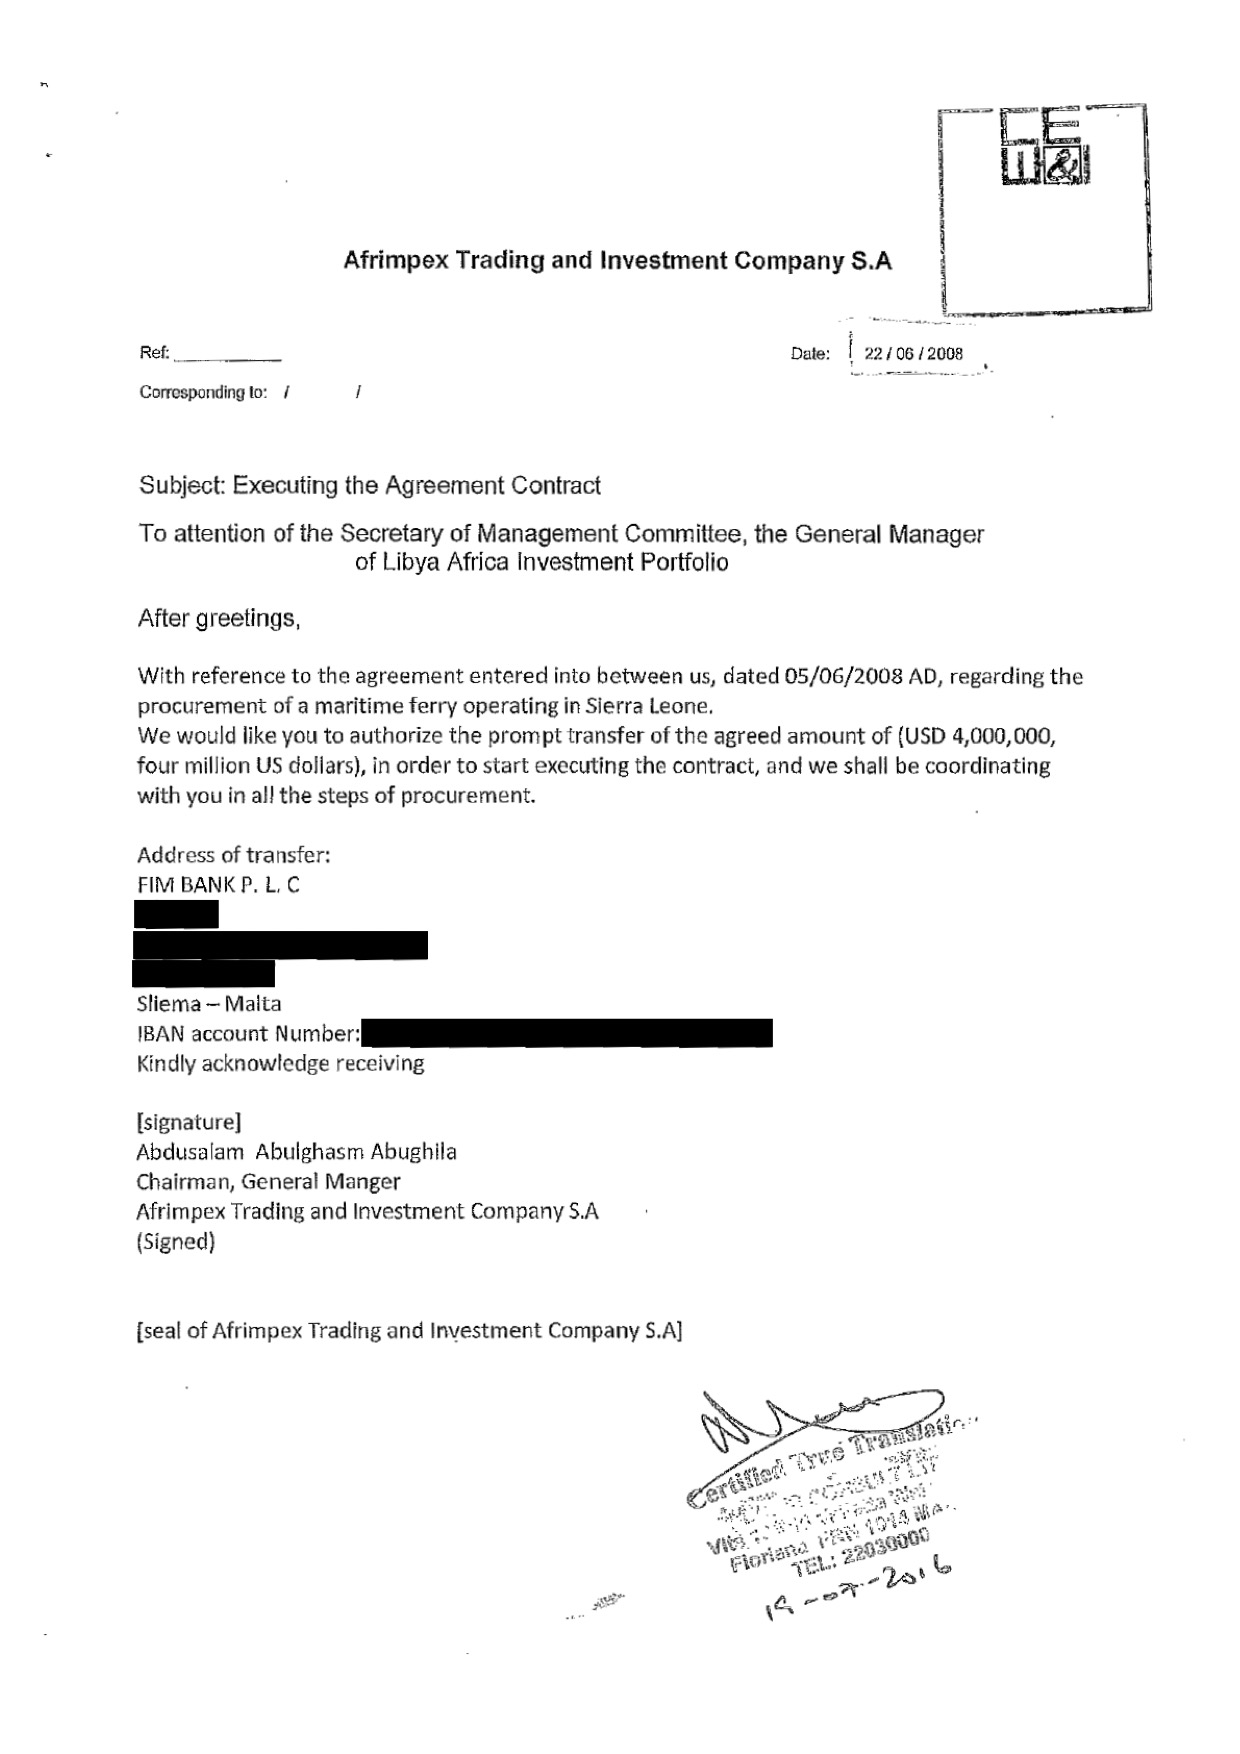 investigations/pg1-letter-from-abughila-to-laip-1.jpg